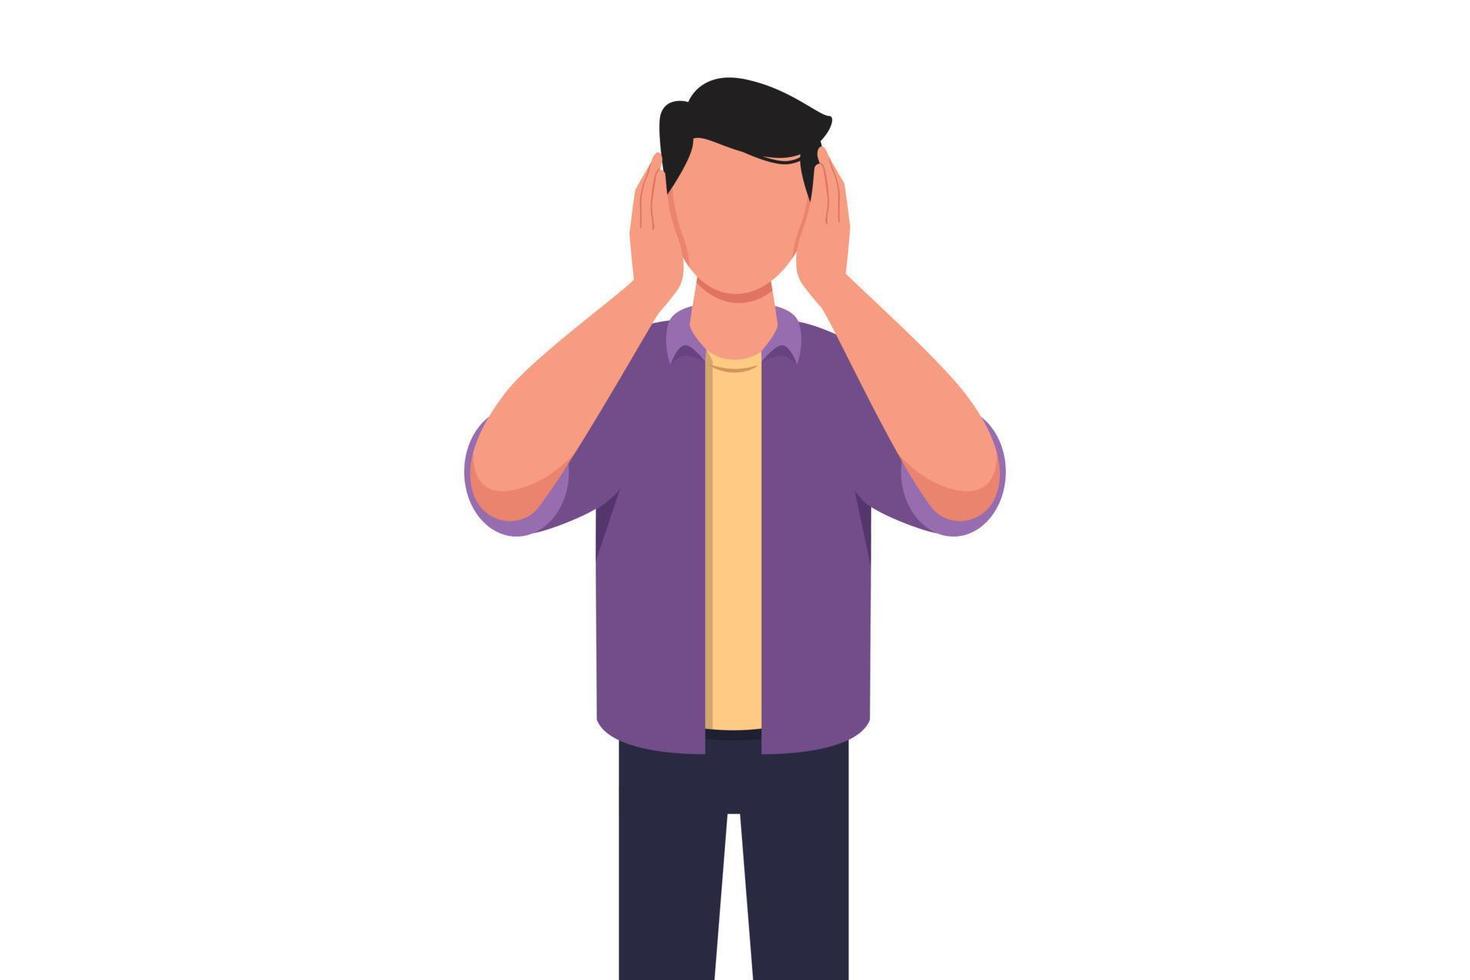 Business flat drawing young businessman covering or closing his ears with hands, making don't hear or listen gesture. Male manager does not want to hear or listen. Cartoon graphic vector illustration